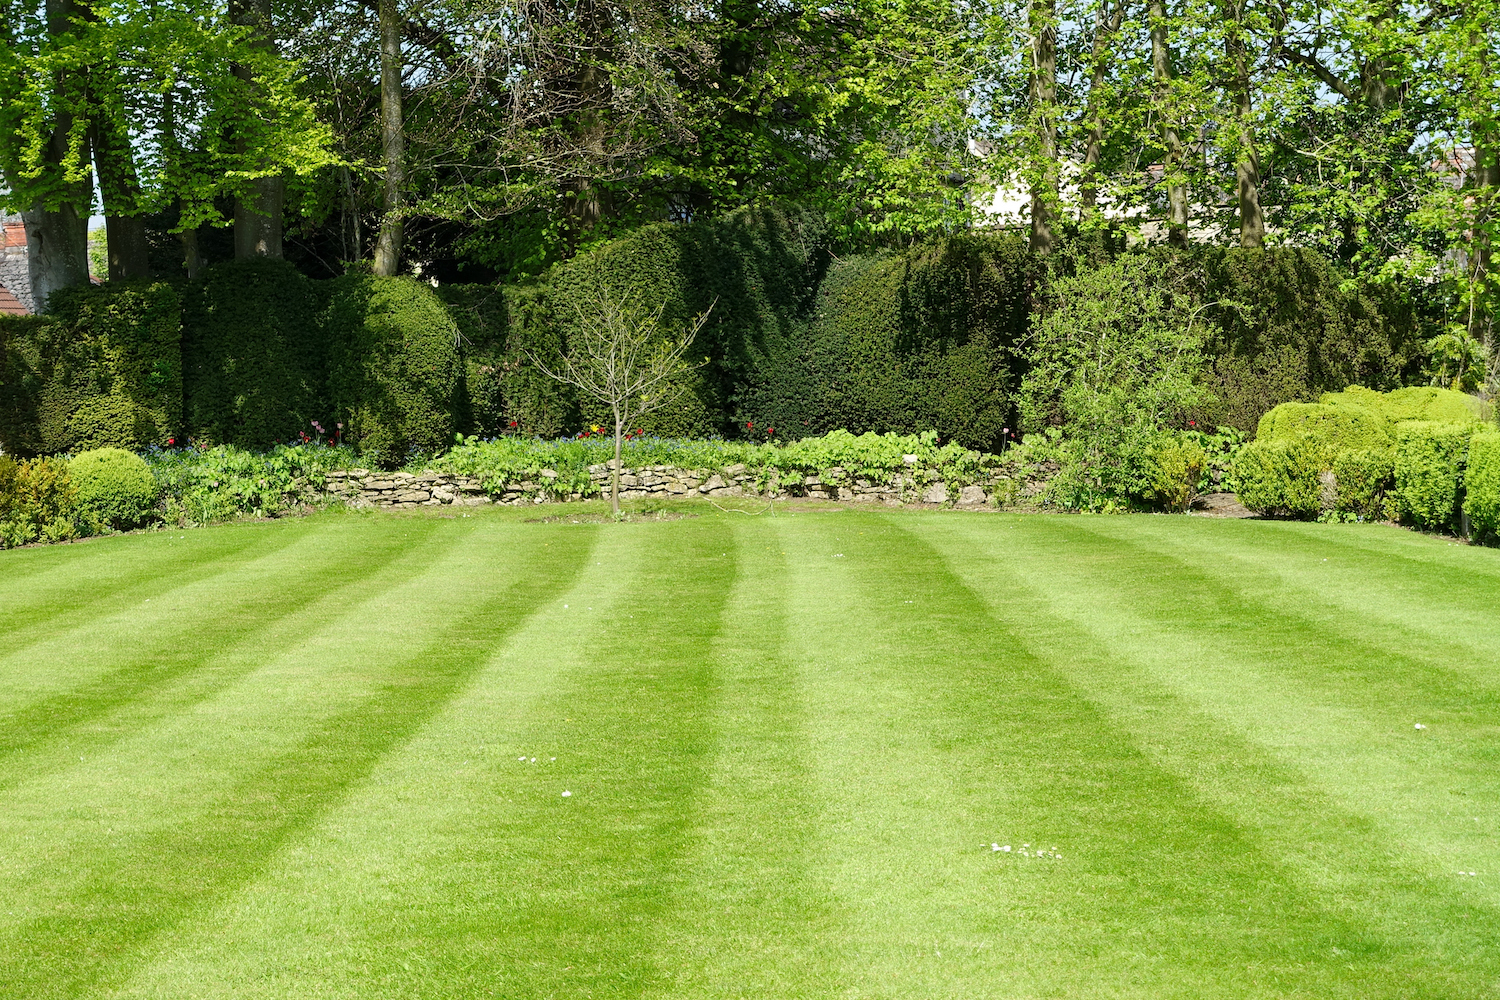 a neatly mowed lawn